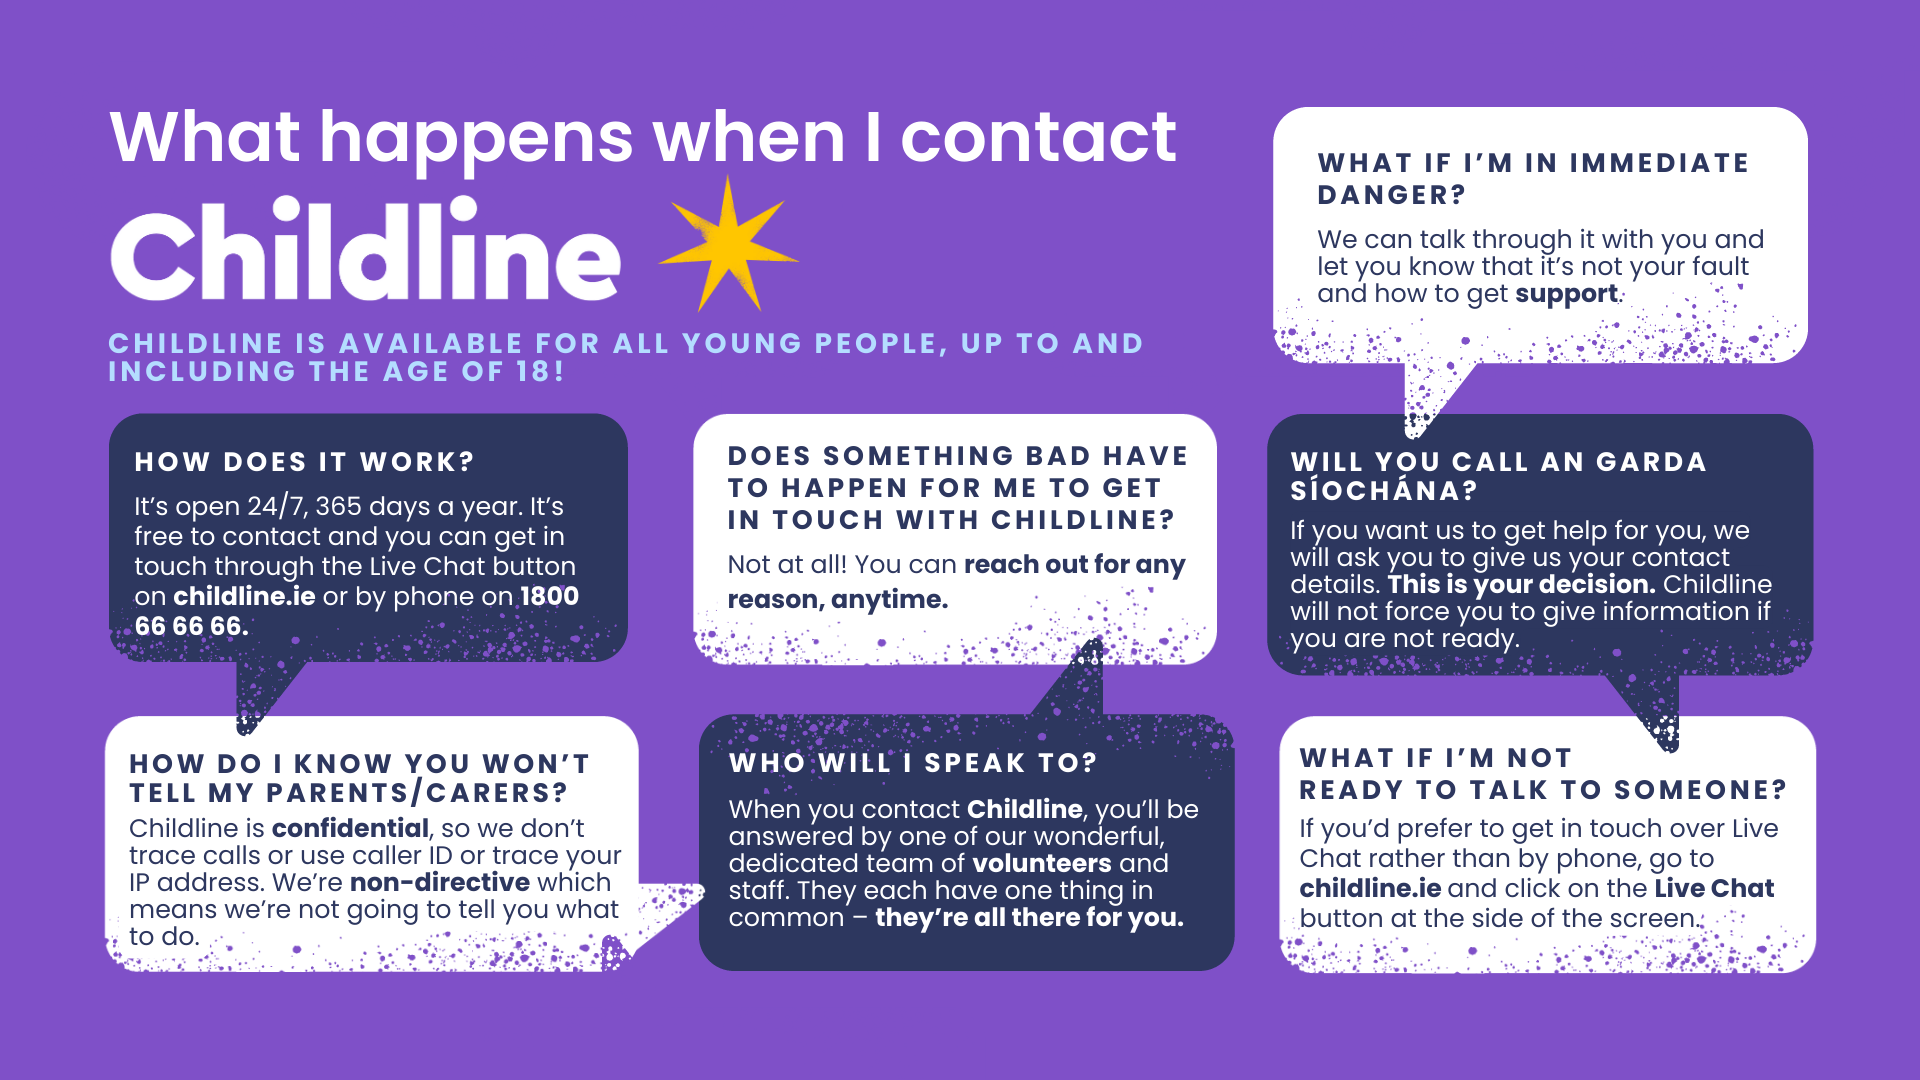 How does it work? It’s open 24 hours a day, 365 days a year – it never closes. It’s free to contact and you can get in touch in two different ways: through our website childline.ie where you can have a live chat with us via the Live Chat button on the screen or by phone – 1800 66 66 66. How do I know you won’t tell my parents/carers? The Childline 24-Hour Support Line is confidential, so we don’t trace calls or use caller ID or trace your IP address. We’re non-directive which means we’re not going to tell you what to do. Instead, we’re going to help you come up with the best solution that’s right for you right now. We’re non-judgemental so we won’t judge what you have done or said. We’re here to listen and support you through this difficult time. Who will I be speaking to? When you contact Childline, you’ll be answered by one of our wonderful, dedicated team of volunteers and staff. They each have one thing in common – they’re all there for you. Does something bad have to happen for me to get in touch with Childline? Not at all! You can talk to Childline about anything that’s happening in your life – how your day was, your friends, your family, school life, relationships, mental health, if you’re feeling anxious, if you’re being bullied, if you’ve lost a loved one, etc. What if I’m in immediate danger? We do get calls from children who are going through something really dangerous and it’s important to remember that every young person has the right to be safe and the right to be happy. It’s very natural not to know what to do when you’re in a scary situation. If you contact Childline, we can talk through it with you and let you know that it’s not your fault and how to get support. Will you call An Garda Síochána? If you want us to get help for you, we will ask you to give us your contact details so we can put you in touch with someone whose job it is to make sure you’re safe. This could be someone from the Gardaí or Tusla. This is your decision. Childline will not force you to give information if you are not ready. What if I’m not ready to talk to someone? If you’d prefer to get in touch over Live Chat rather than by phone, go to childline.ie and click on the Live Chat button at the side of the screen. This will immediately open a chat window with one of our Childline volunteers. It’s your safe space to talk about whatever you want to. As well as chatting online, there are lots of supportive articles and videos on the website that can help you cope better with the feelings or situation you’re dealing with. We’re here for you. Reach out, for ANY reason.